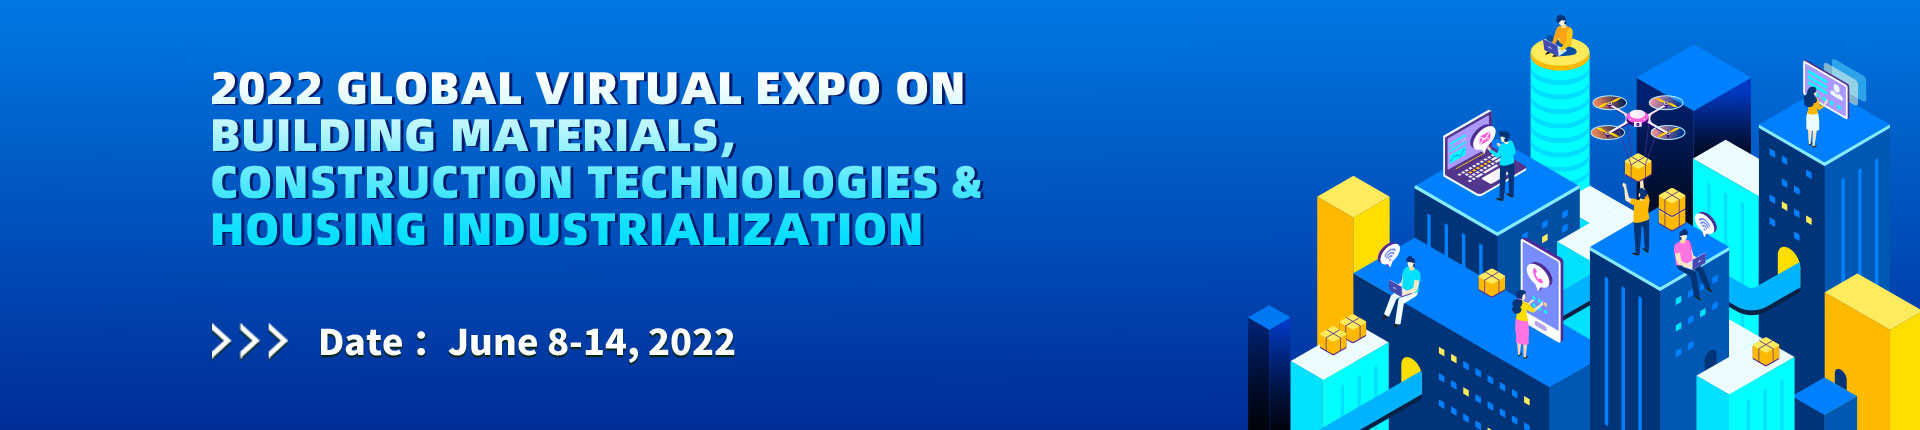 2022 Global Virtual Expo on Building Materials, Construction Technologies & Housing Industrialization